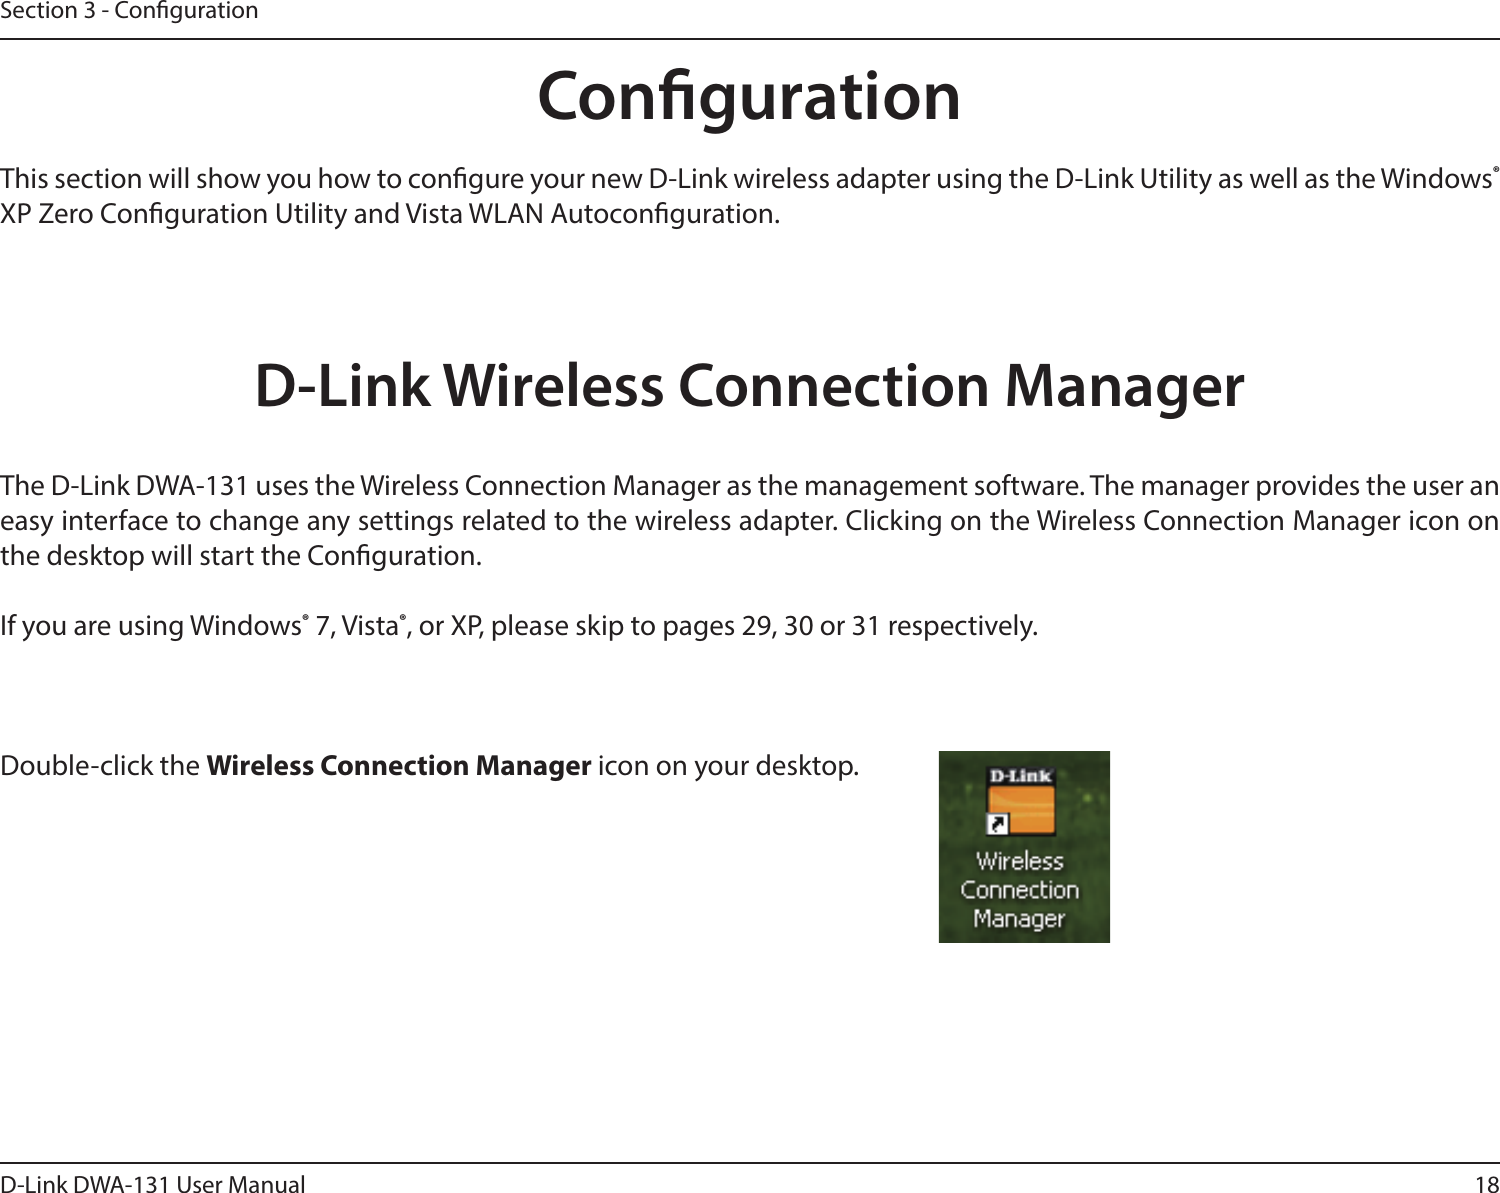 18D-Link DWA-131 User ManualSection 3 - CongurationCongurationThis section will show you how to congure your new D-Link wireless adapter using the D-Link Utility as well as the Windows® XP Zero Conguration Utility and Vista WLAN Autoconguration.D-Link Wireless Connection ManagerThe D-Link DWA-131 uses the Wireless Connection Manager as the management software. The manager provides the user an easy interface to change any settings related to the wireless adapter. Clicking on the Wireless Connection Manager icon on the desktop will start the Conguration.If you are using Windows® 7, Vista®, or XP, please skip to pages 29, 30 or 31 respectively.Double-click the Wireless Connection Manager icon on your desktop.